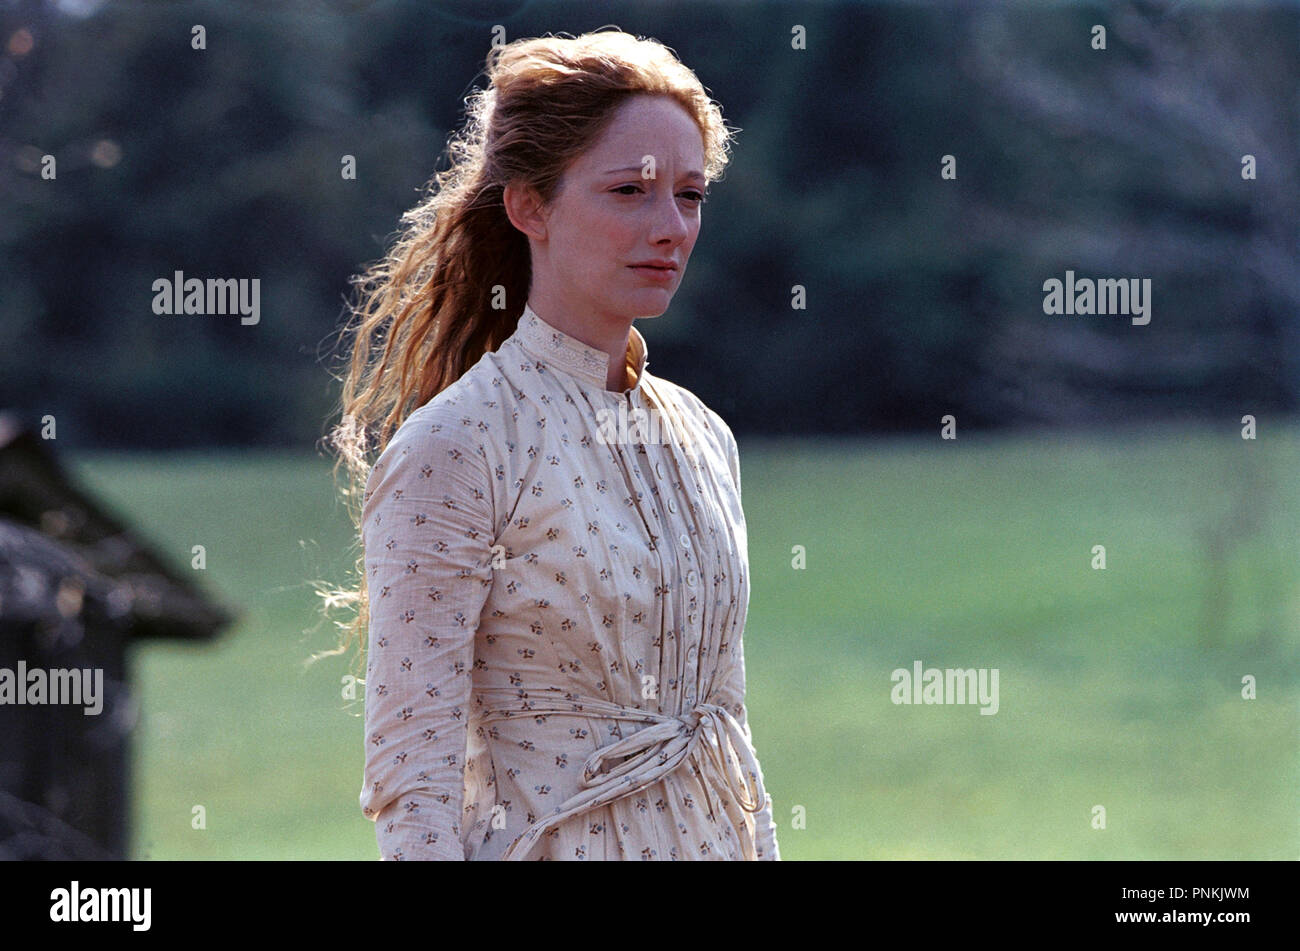 Original film title: THE VILLAGE. English title: THE VILLAGE. Year: 2004. Director: M. NIGHT SHYAMALAN. Stars: JUDY GREER. Credit: TOUCHSTONE PICTURES / Album Stock Photo